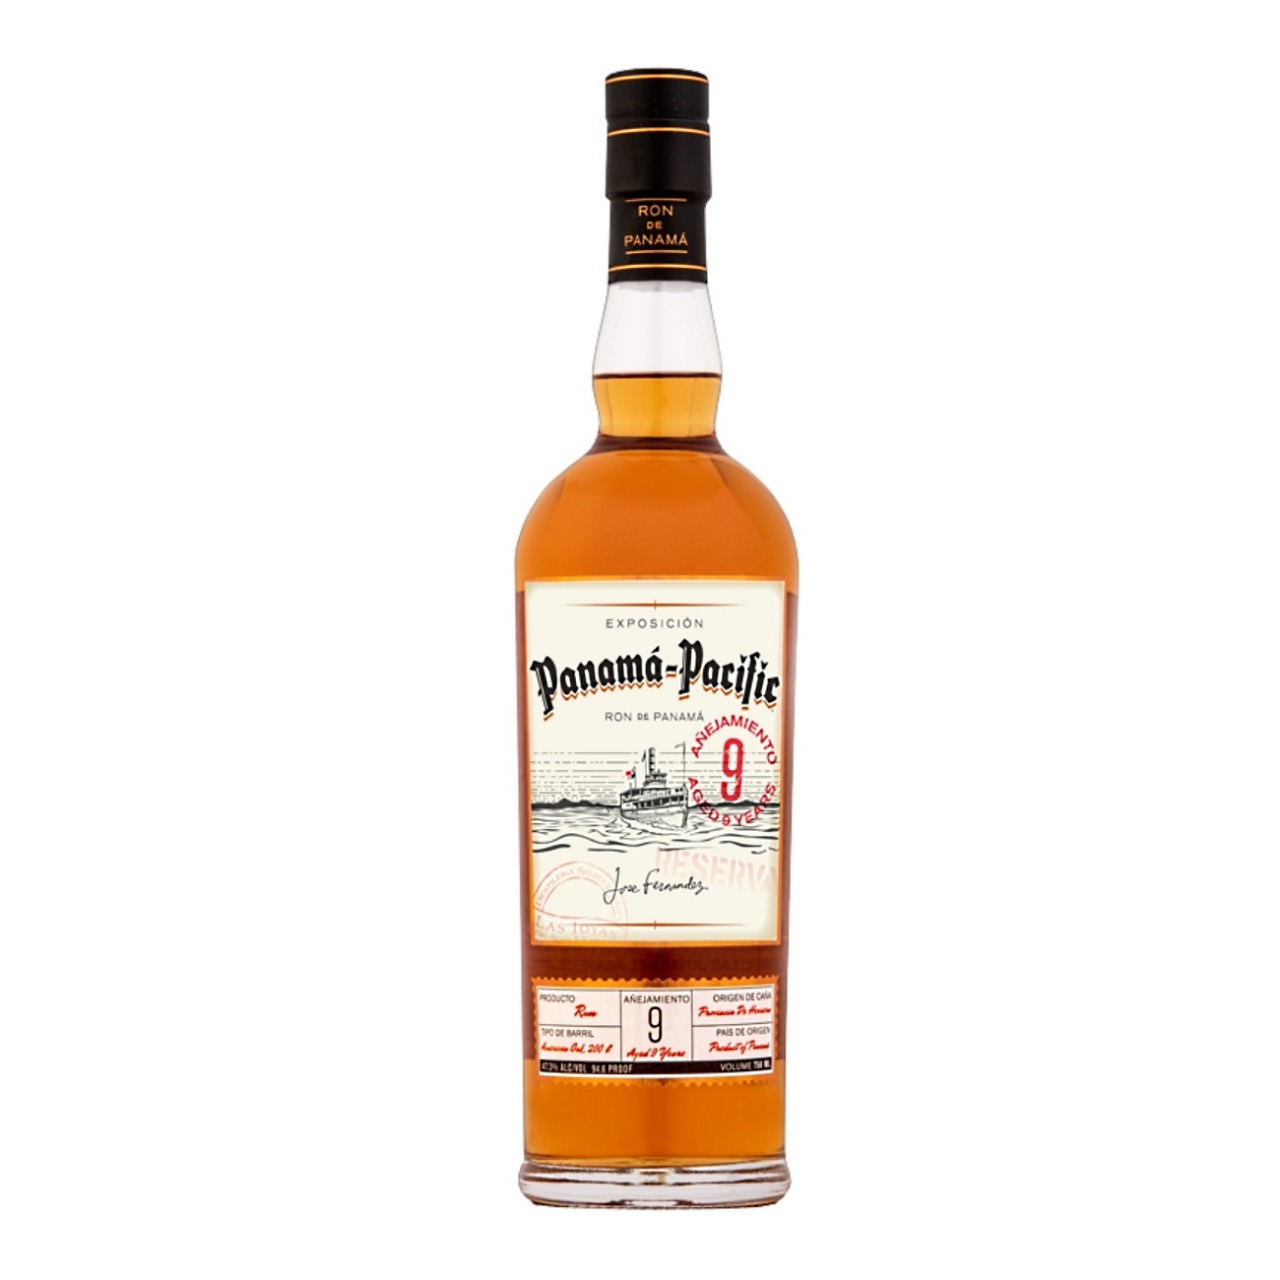 Bottle image of Panama-Pacific Aged 9 Years